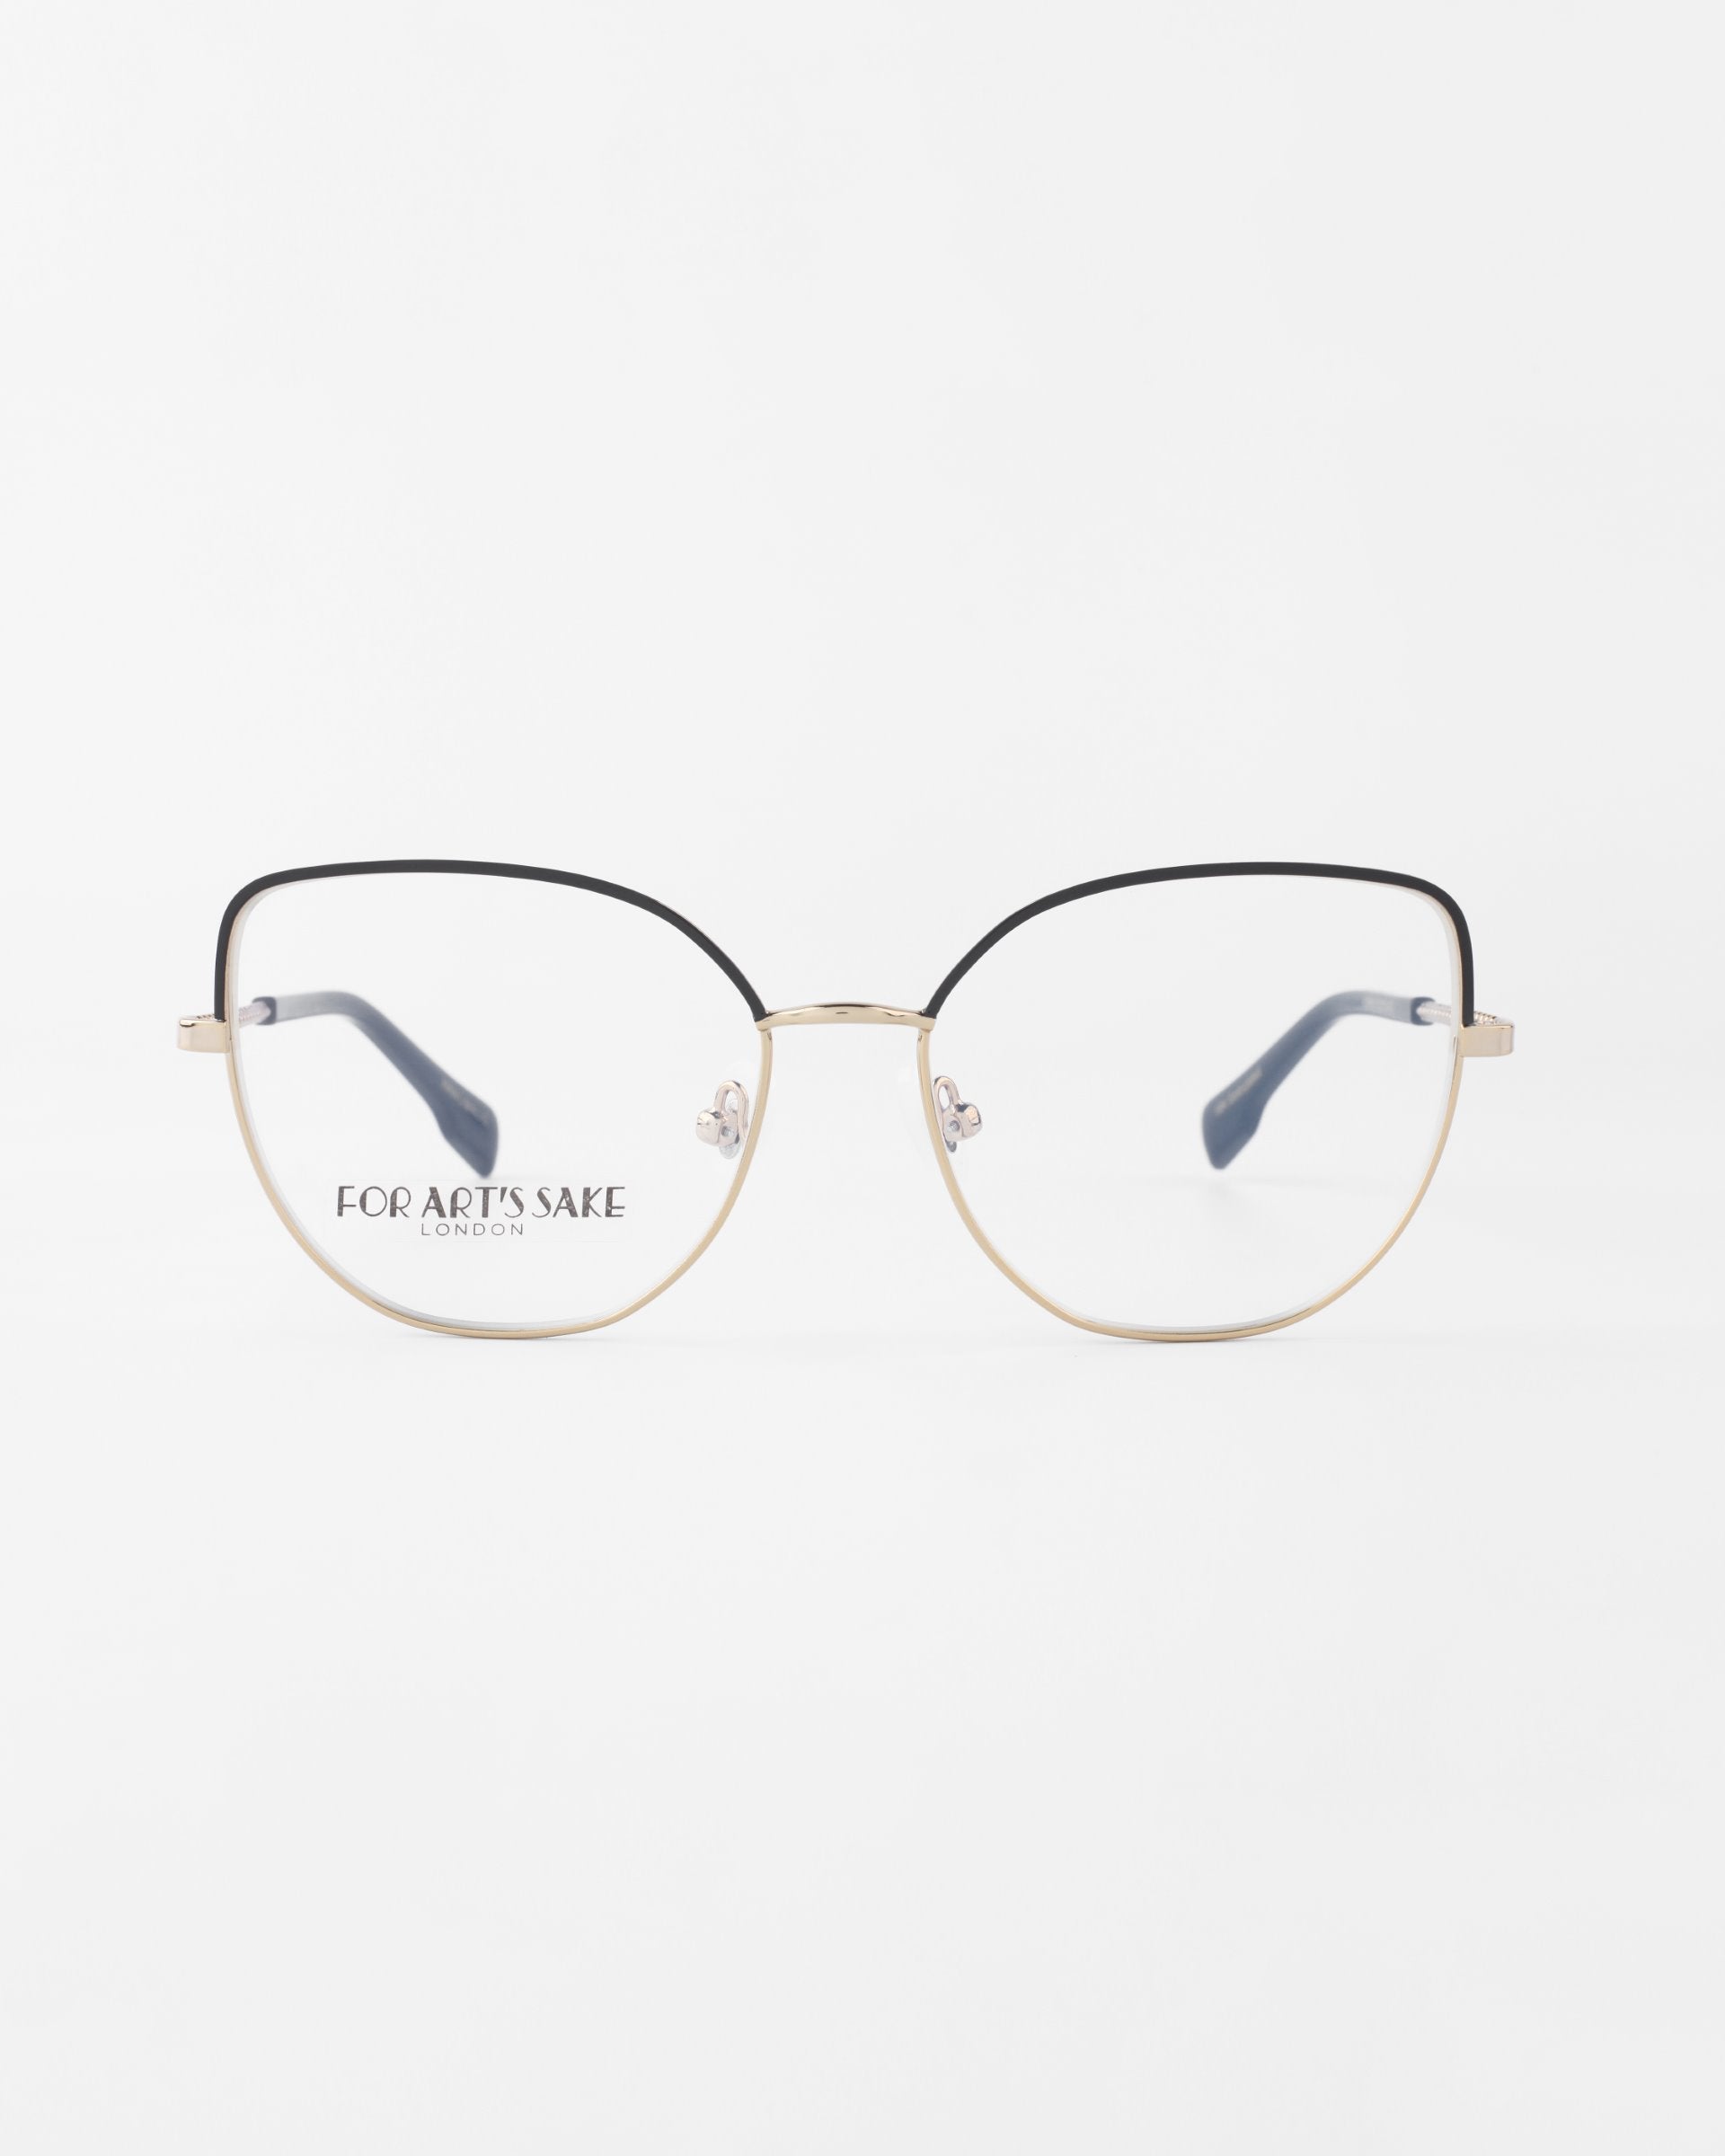 A pair of eyeglasses with a thin, gold metal frame and black rims on the top half of the lenses, featuring a subtle cat-eye silhouette. The product name "Ophelia" and brand name "For Art's Sake®" are printed on the left lens. The background is plain white.